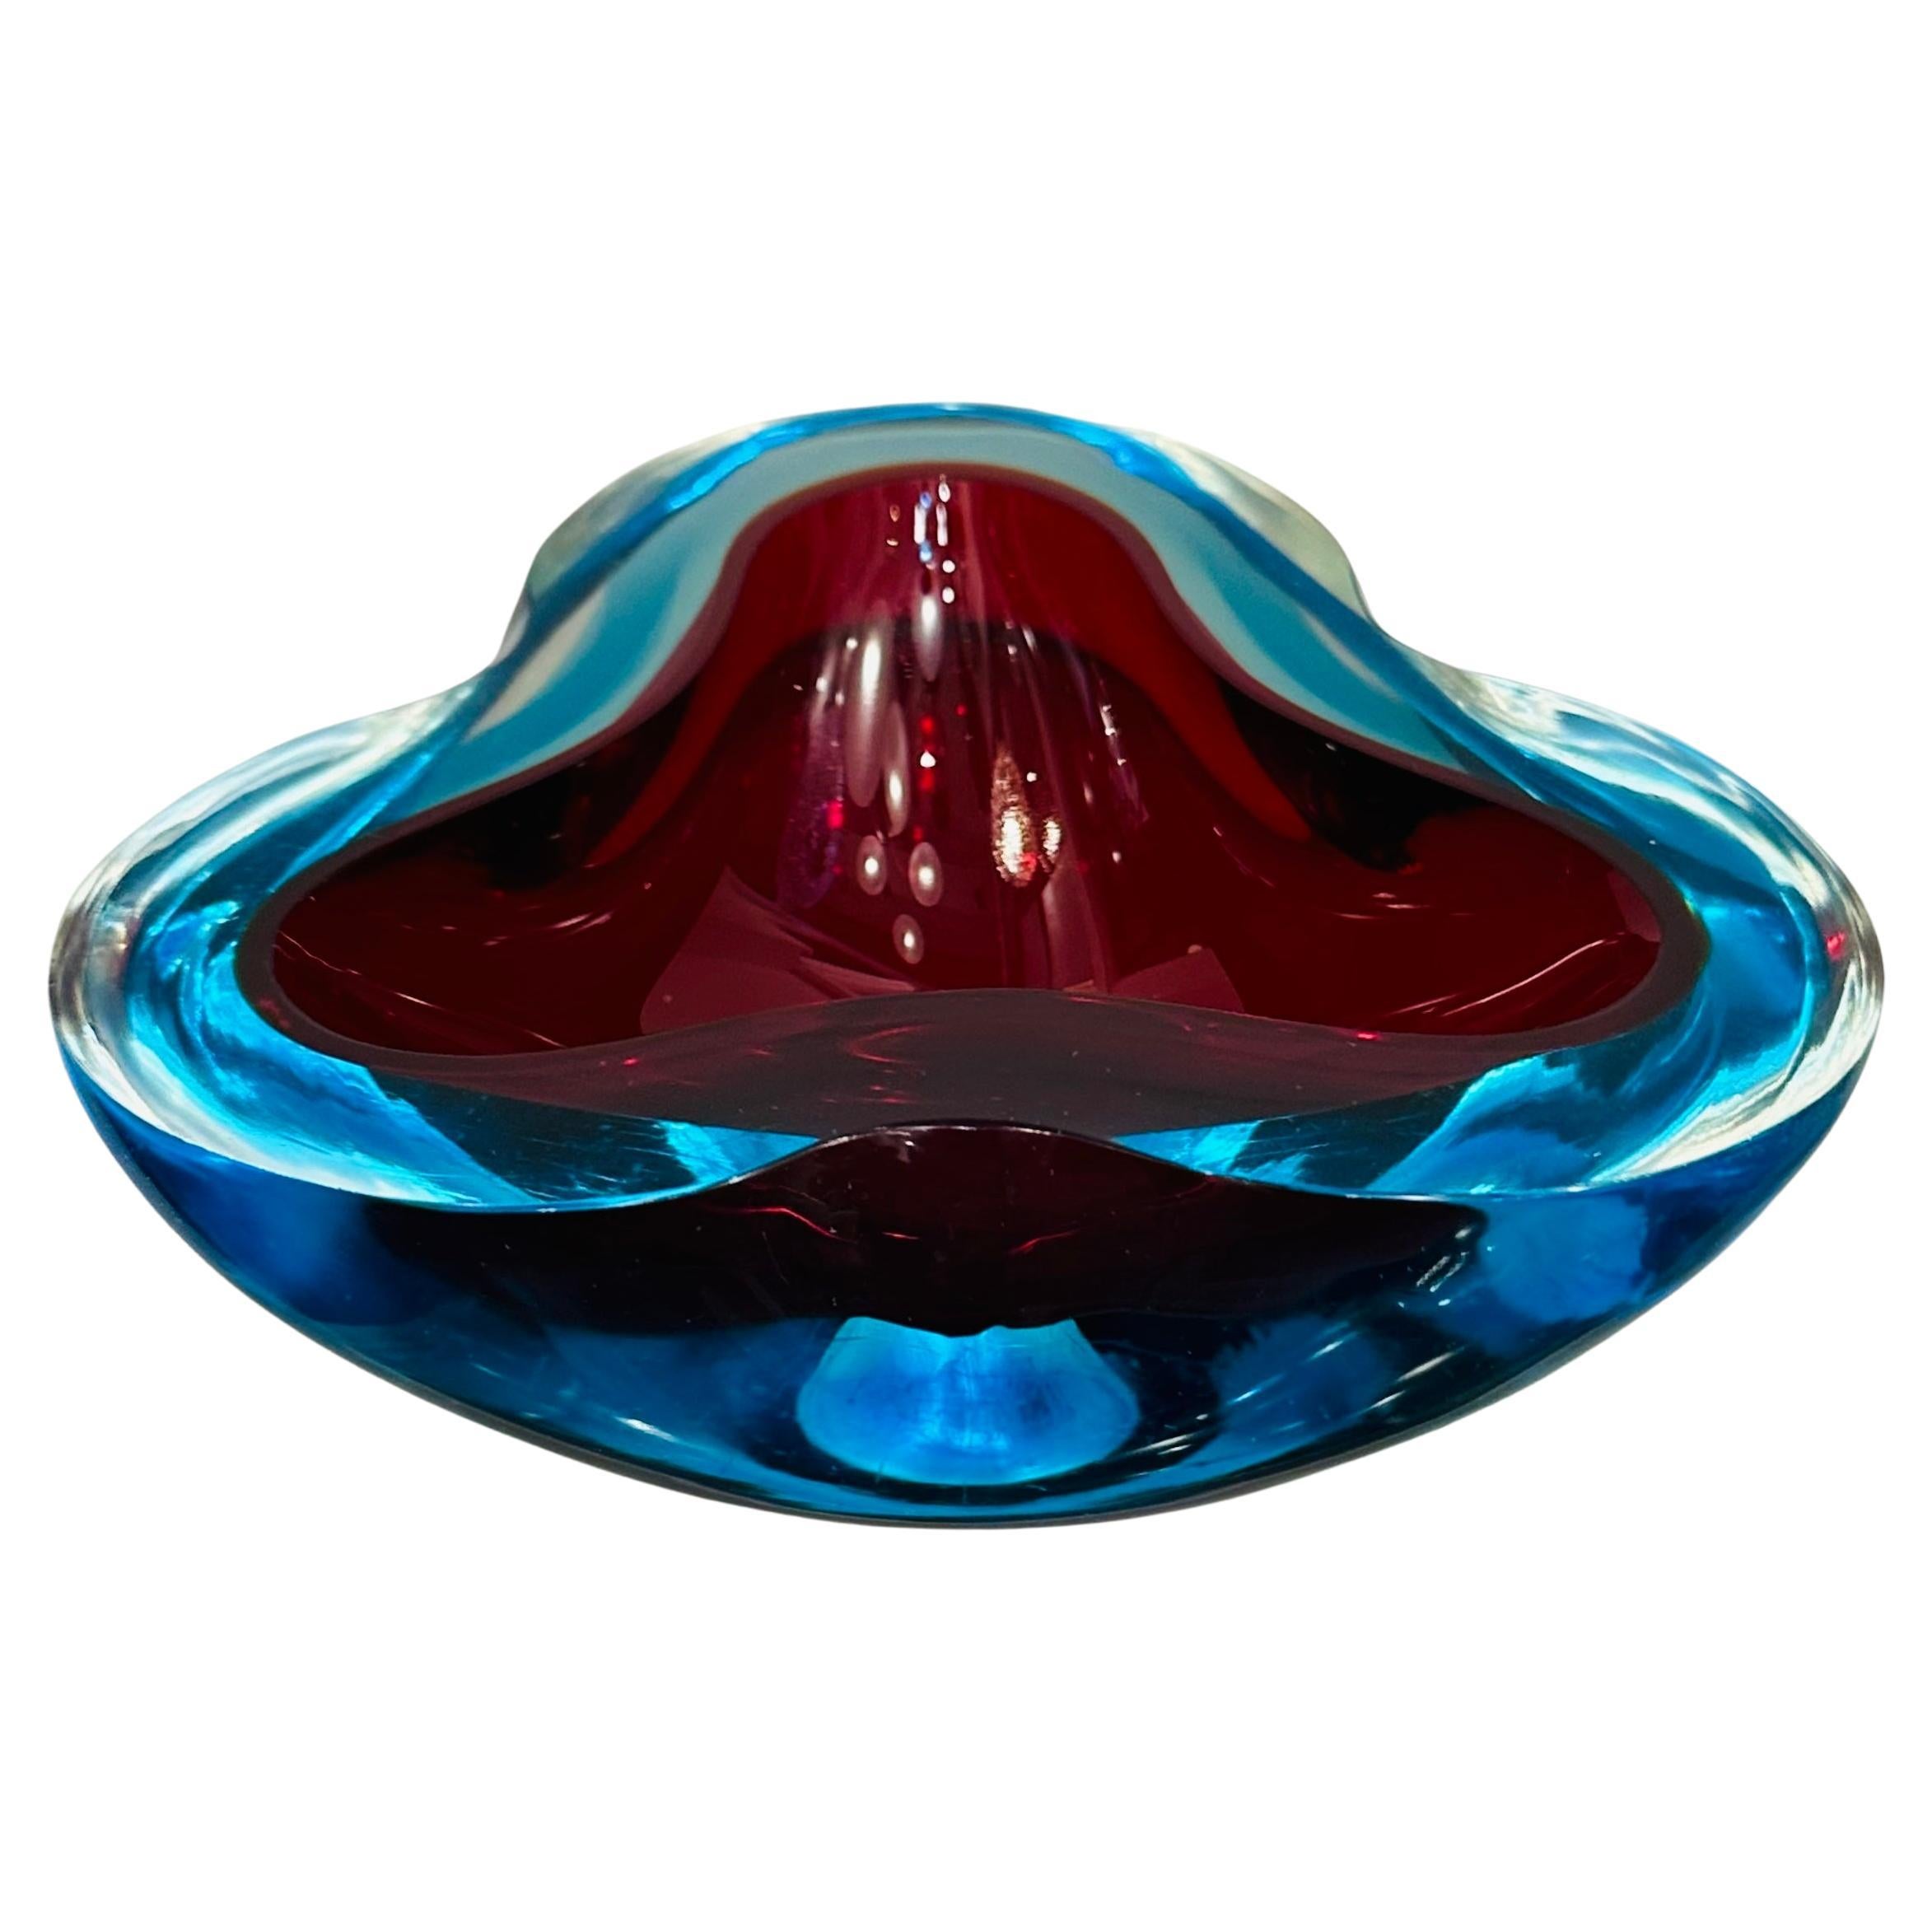 1970s Italian Murano Sommerso Red Turquoise & Clear Art Glass Bowl Dish Ashtray